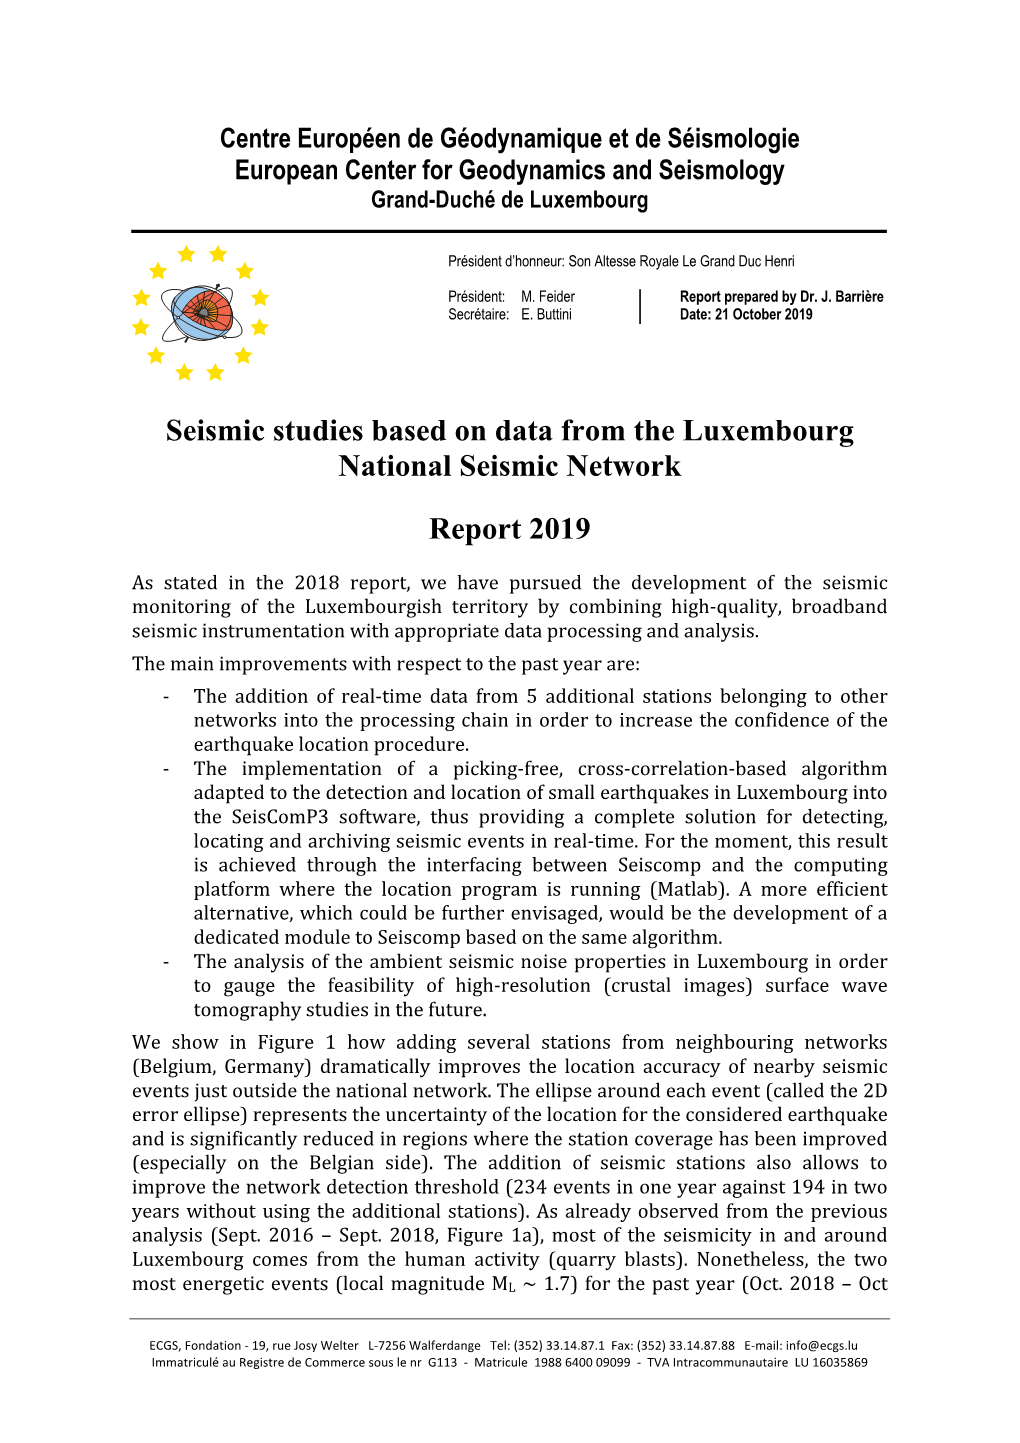 Seismic Studies Based on Data from the Luxembourg National Seismic Network